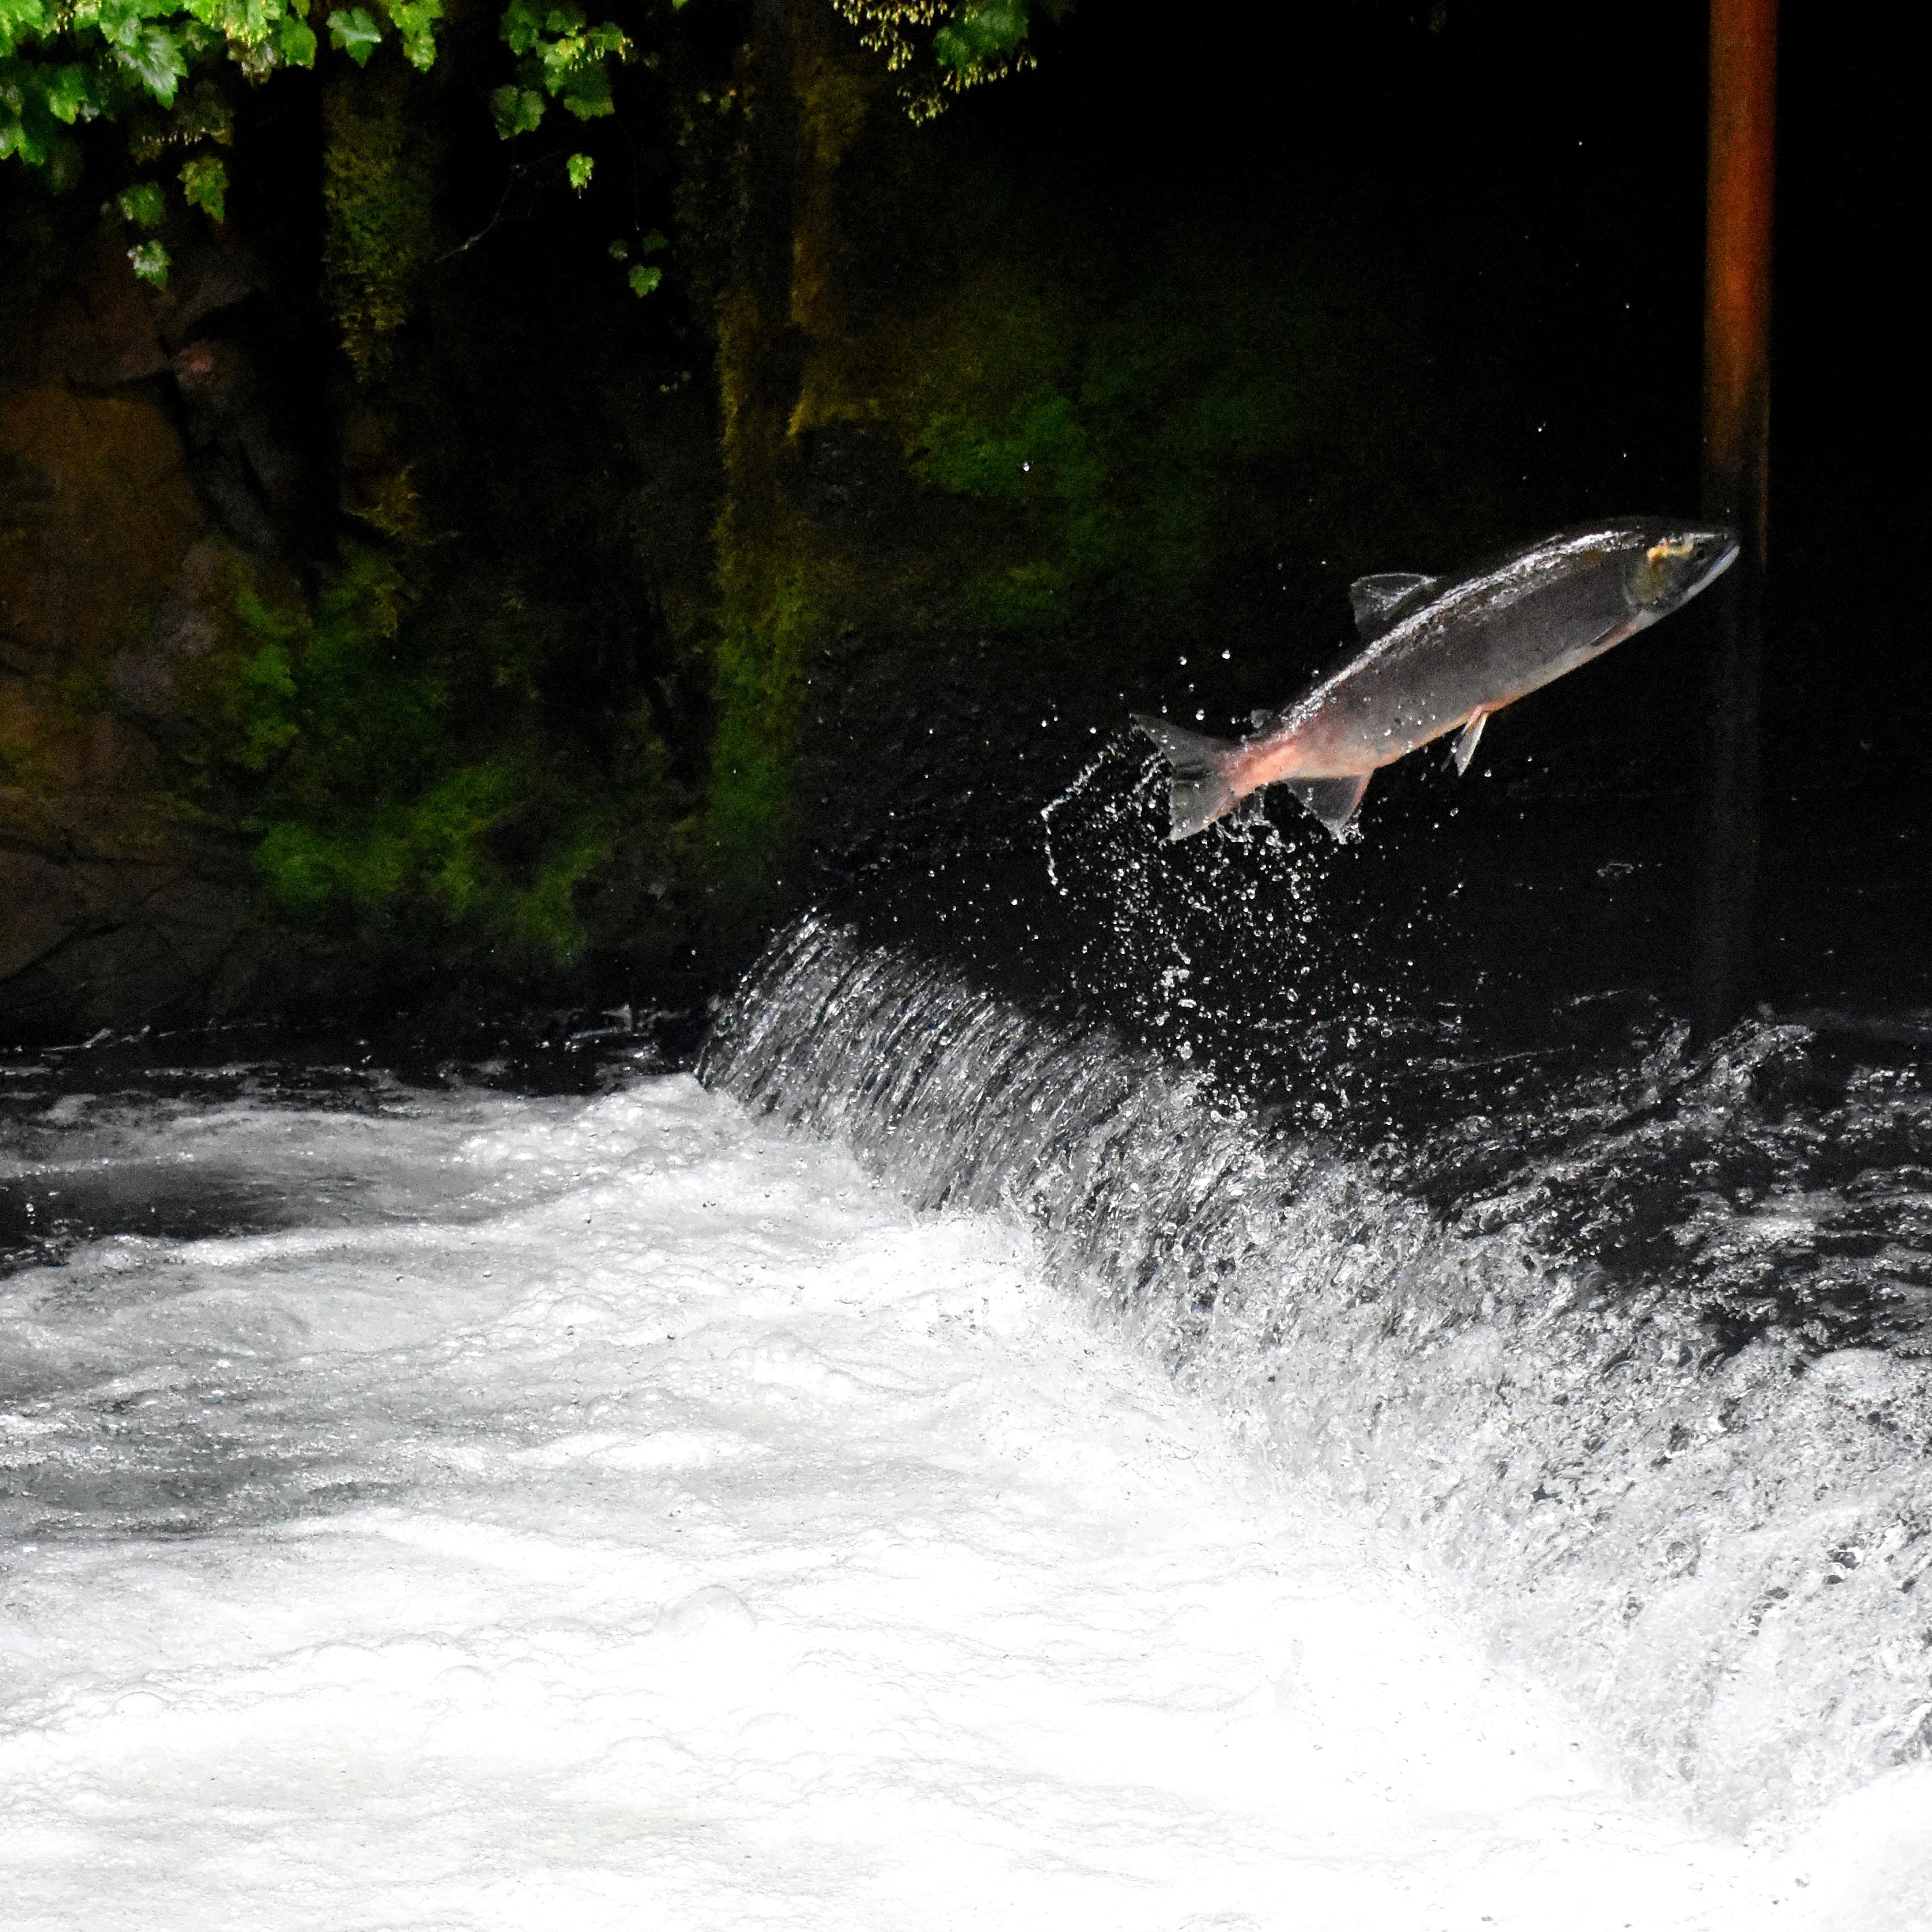 salmon leaping as it swims upstream